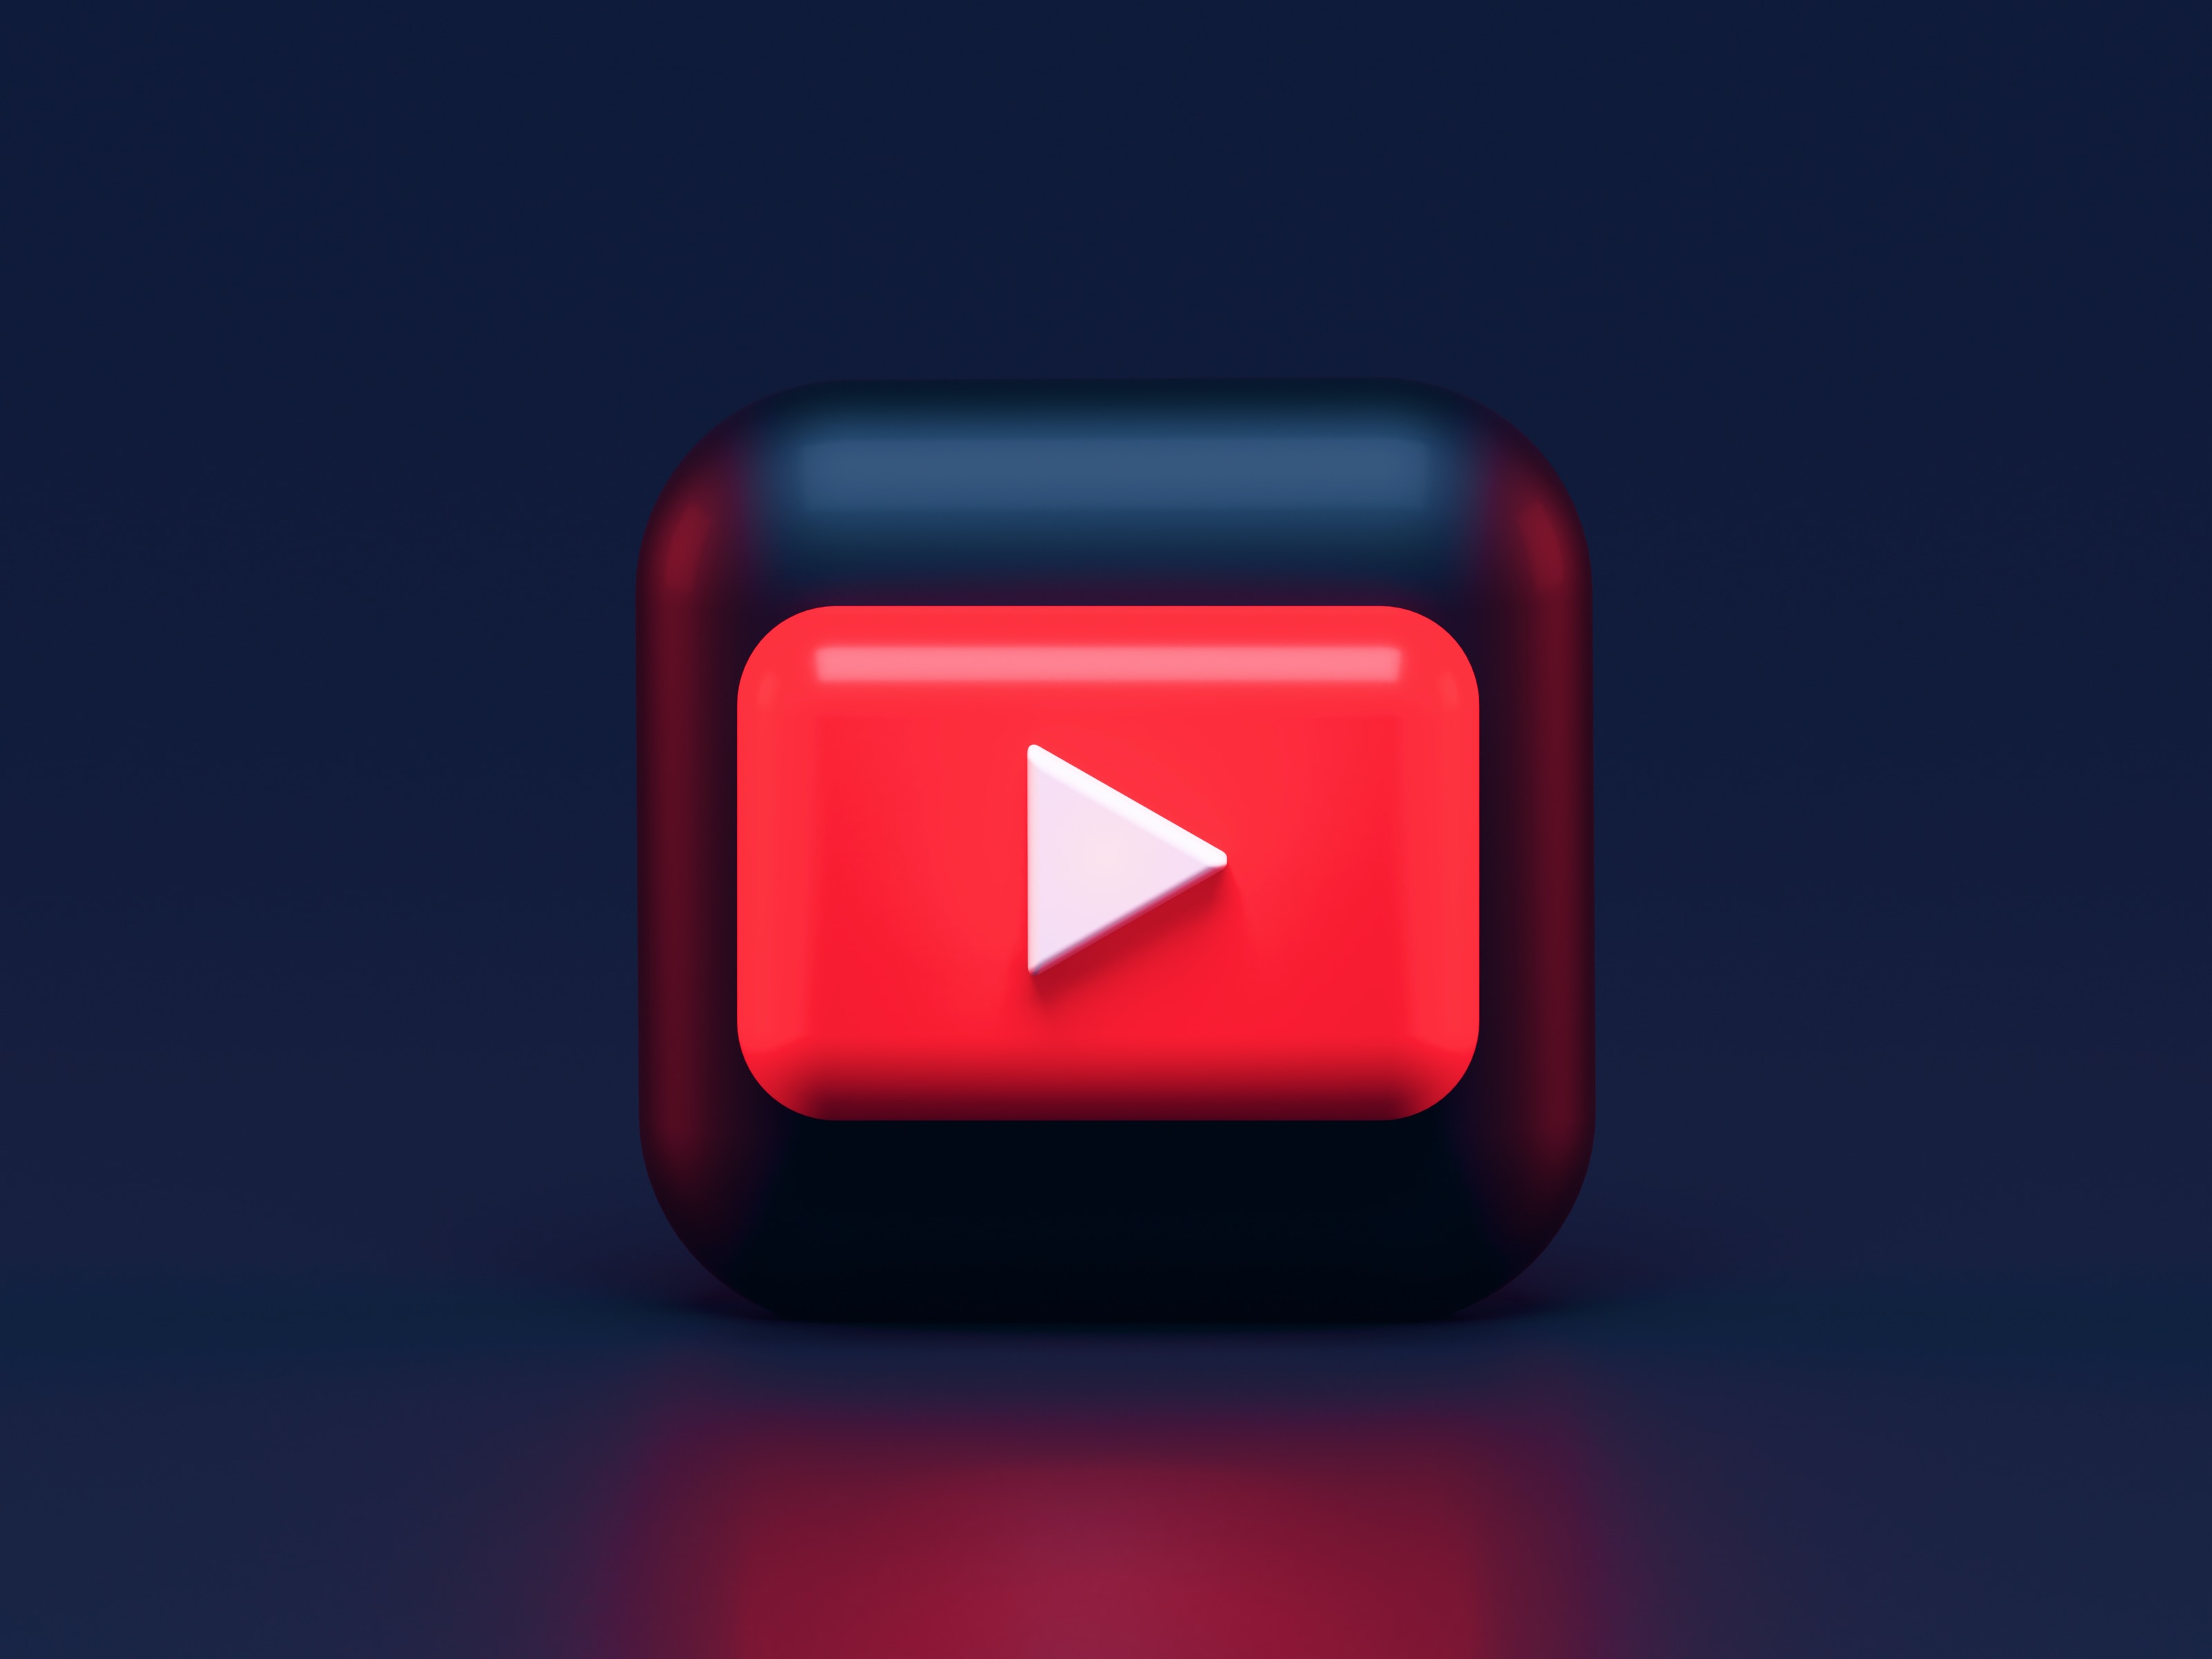 Unveiling everything you need to know about the largest platform sharing video content: Youtube